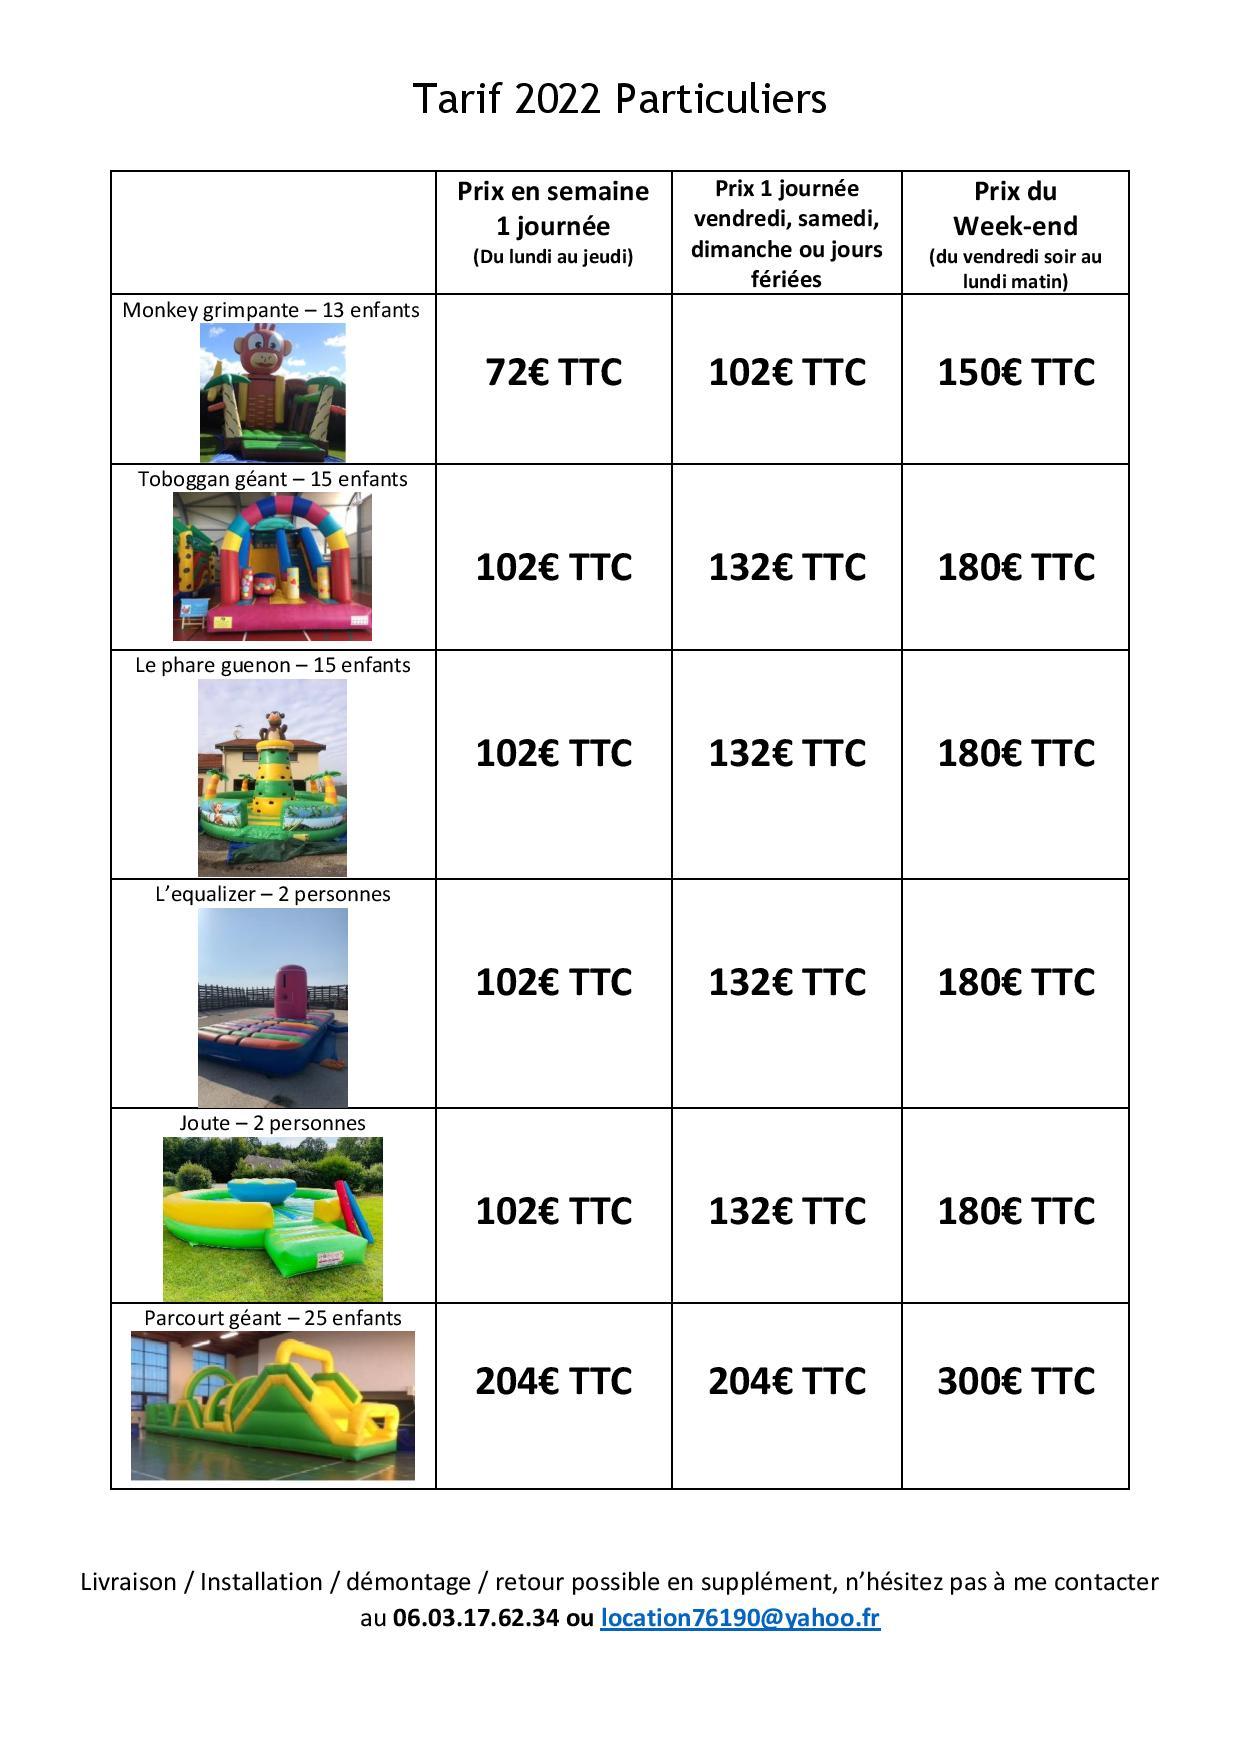 Tarif structures gonflables particuliers 2022 page 3